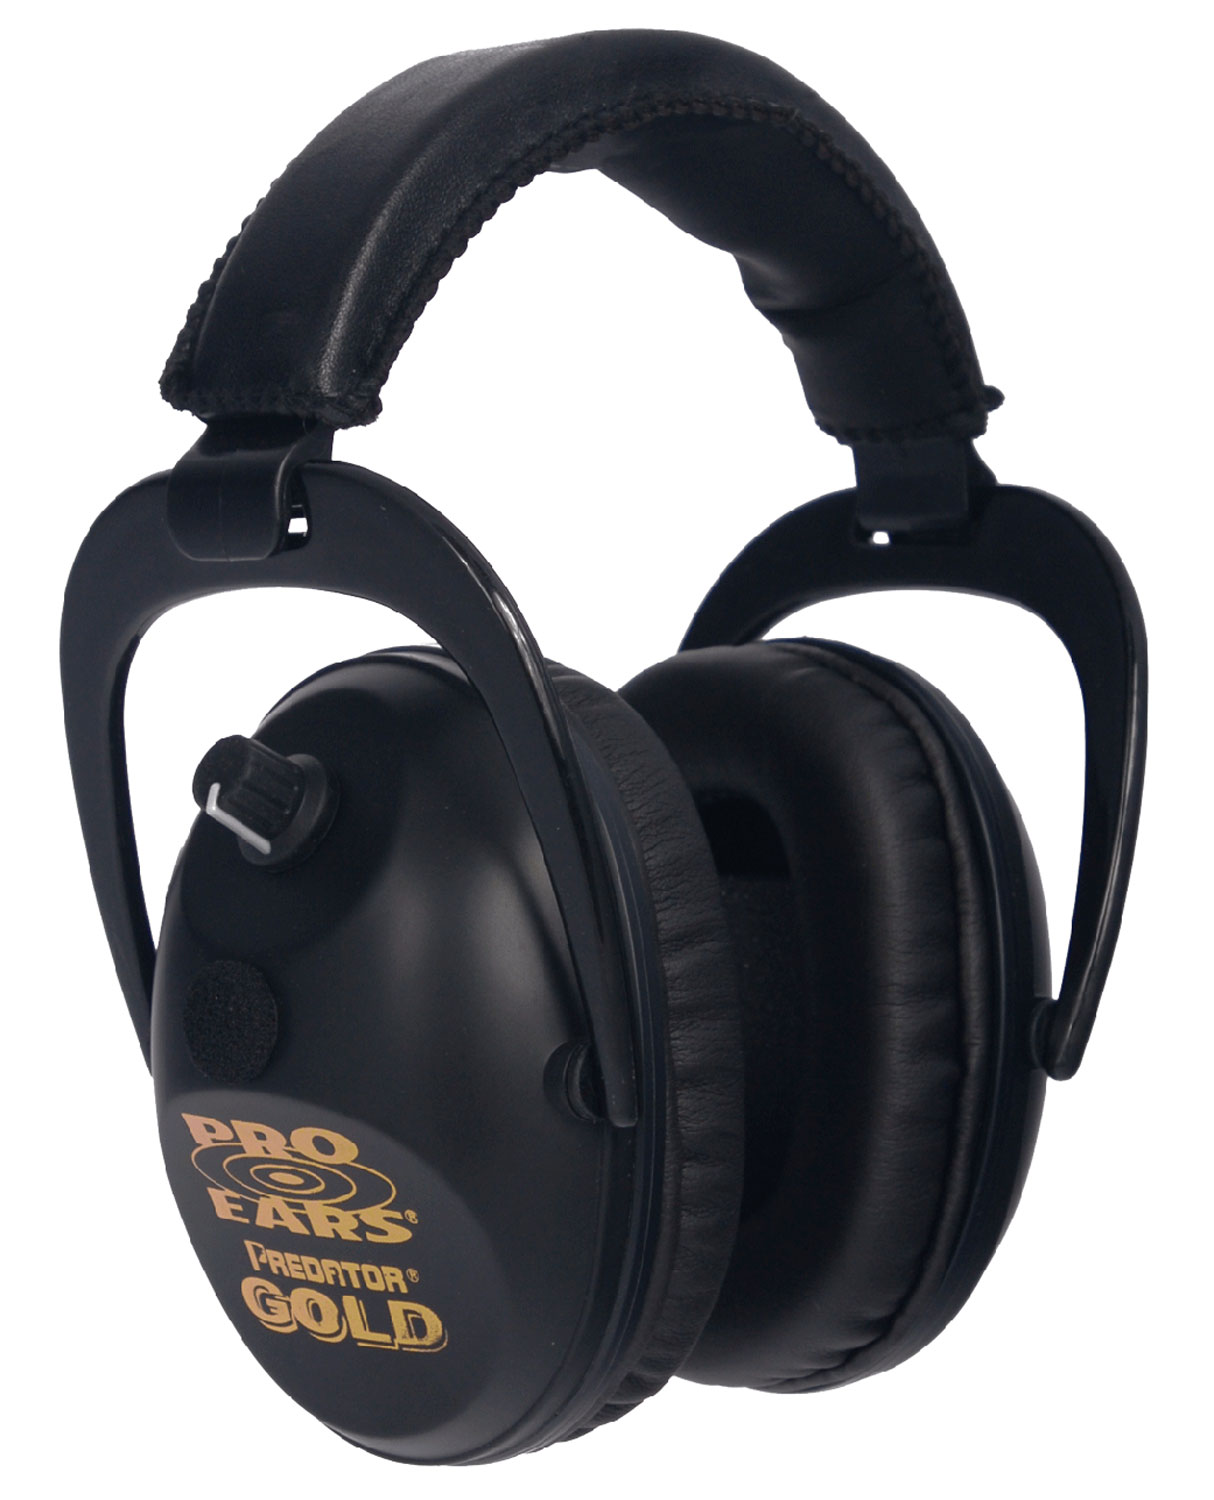 black proears hearing protection